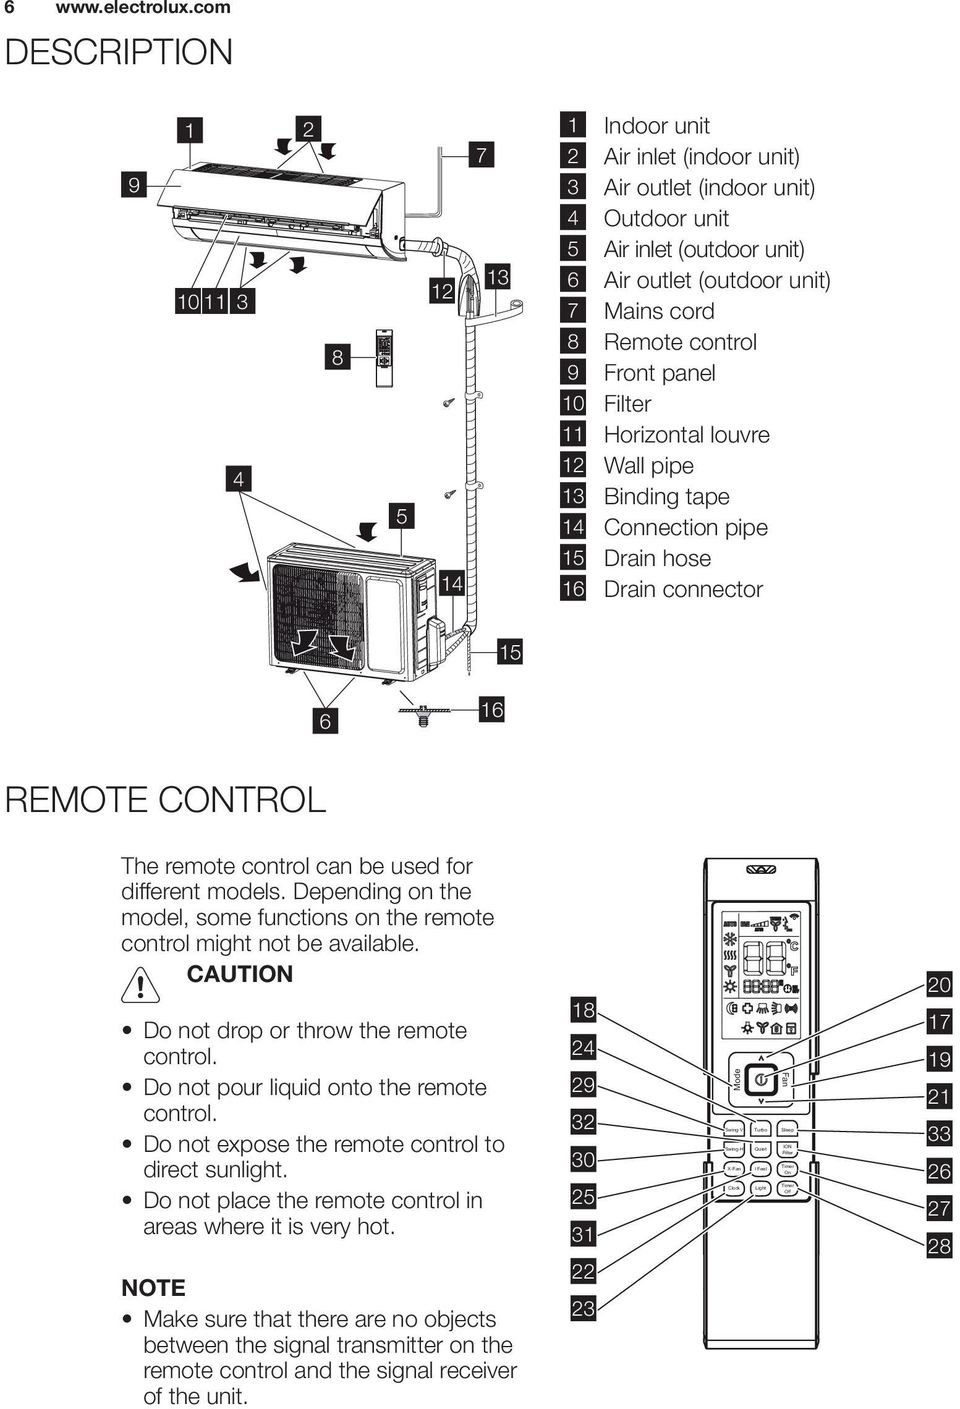 Remote control 9 Front panel 10 Filter 11 Horizontal louvre 12 Wall pipe 13 Binding tape 14 Connection pipe 15 Drain hose 16 Drain connector 15 6 16 REMOTE CONTROL The remote control can be used for